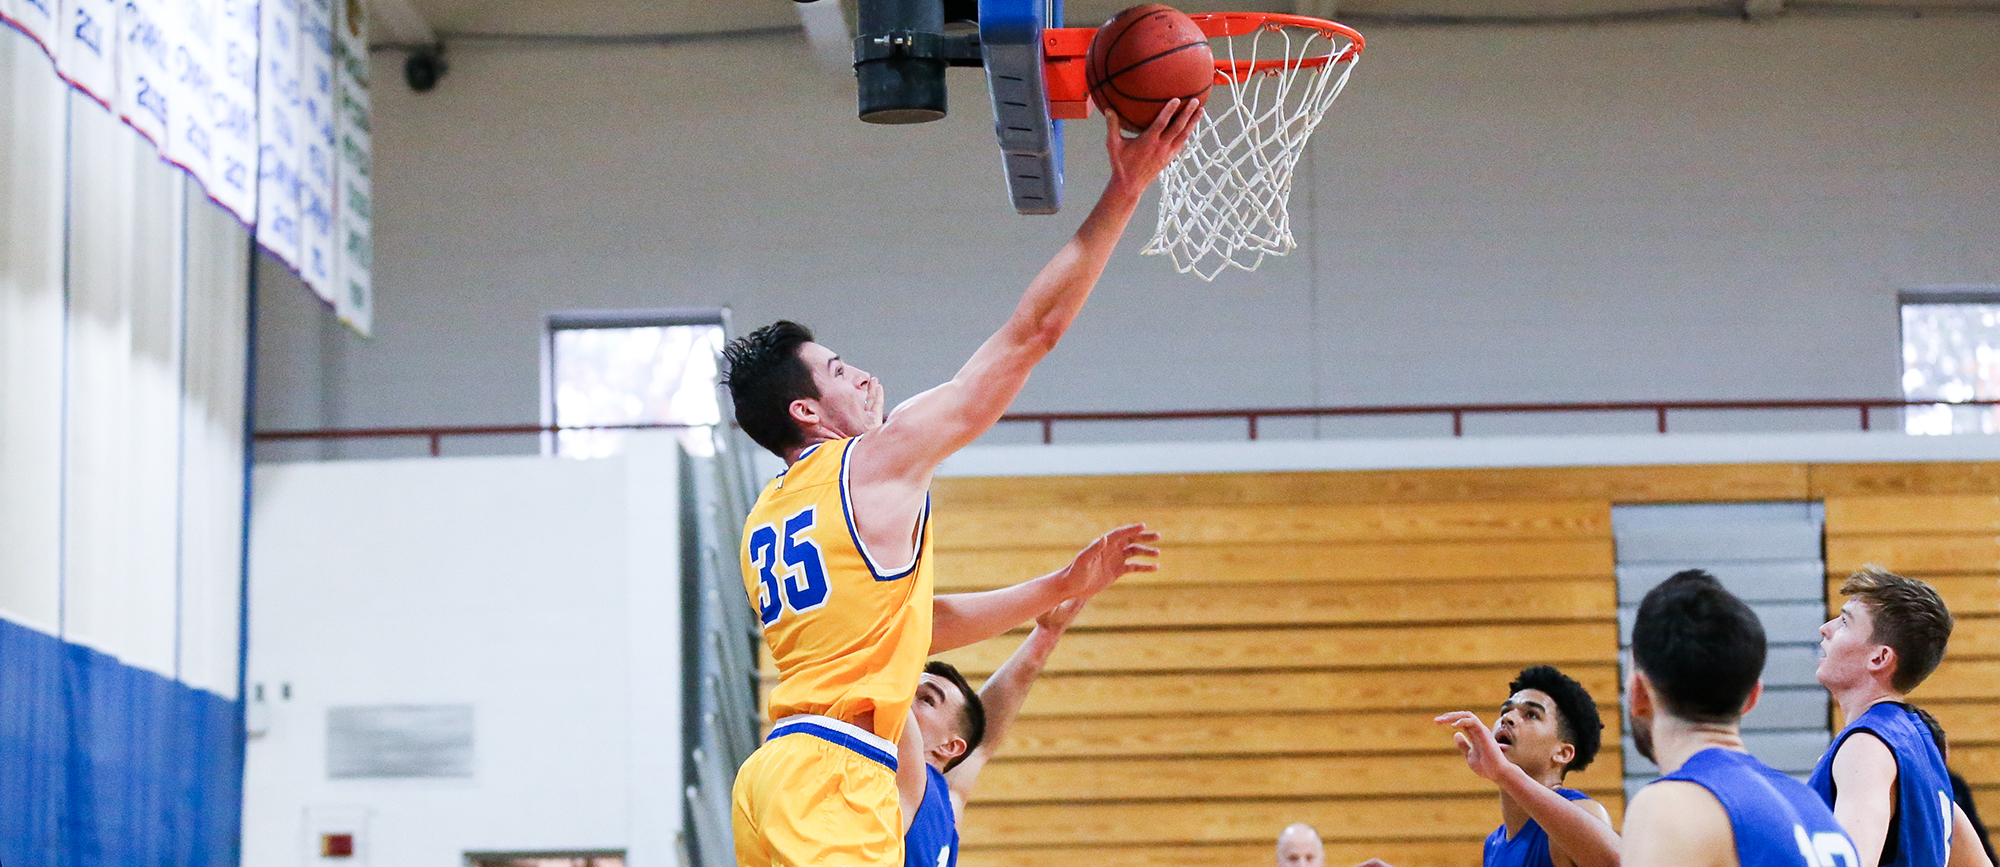 Freshman Zach Tavitian recorded 18 points, six rebounds and three blocks in Western New England's 73-61 loss to Nichols on Saturday. (Photo by Chris Marion)